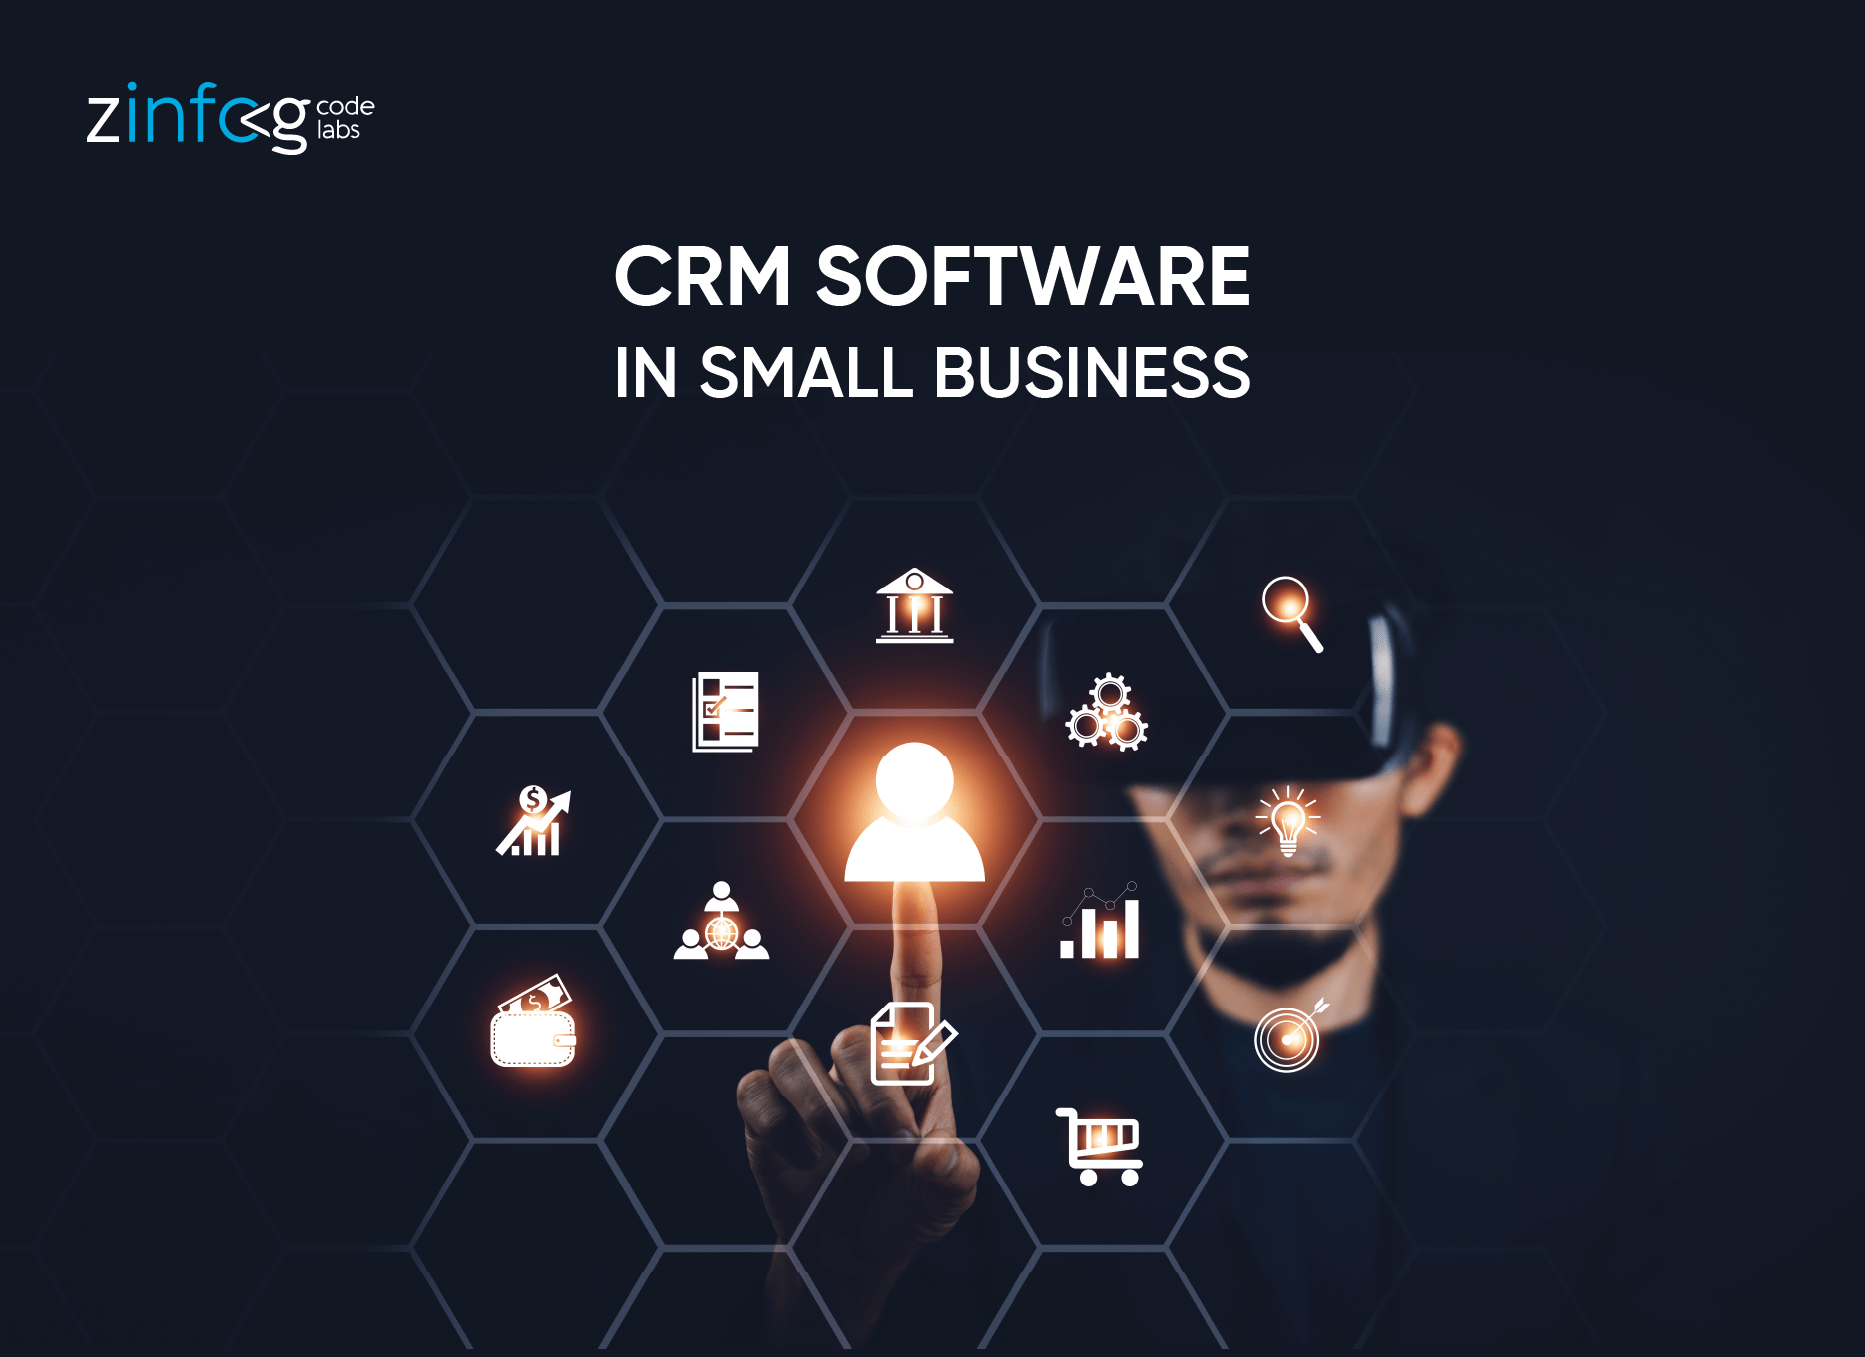 crm-software-for-small-business.html